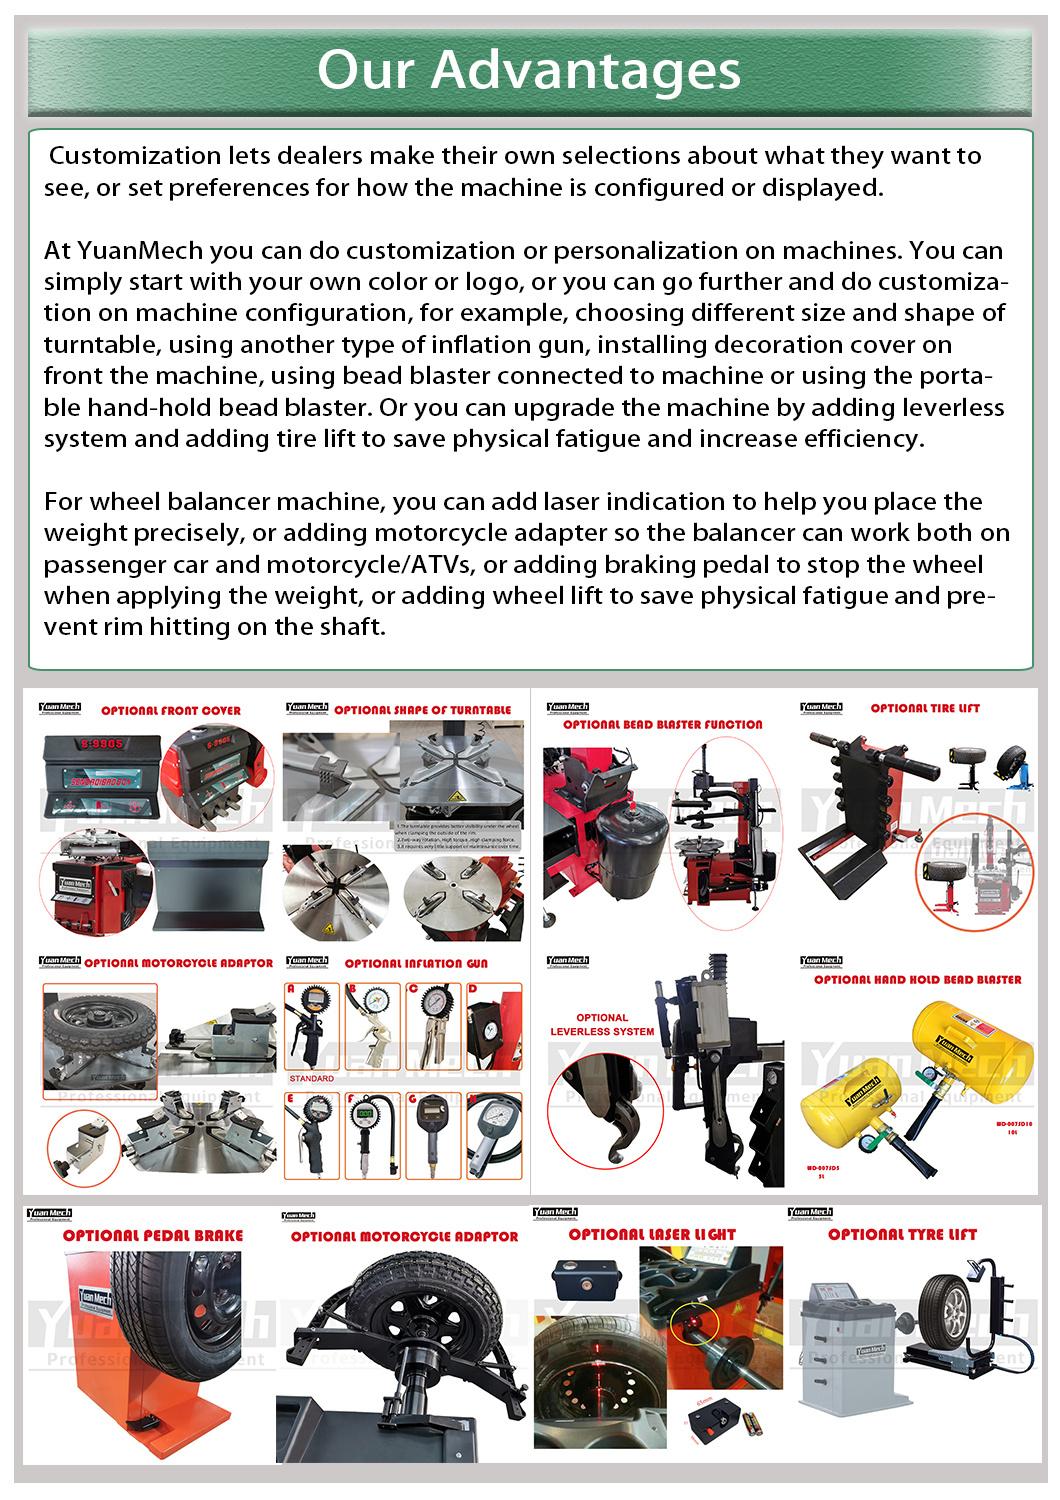 Yuanmech Tire Service Machine for Workshop Changing Tyre